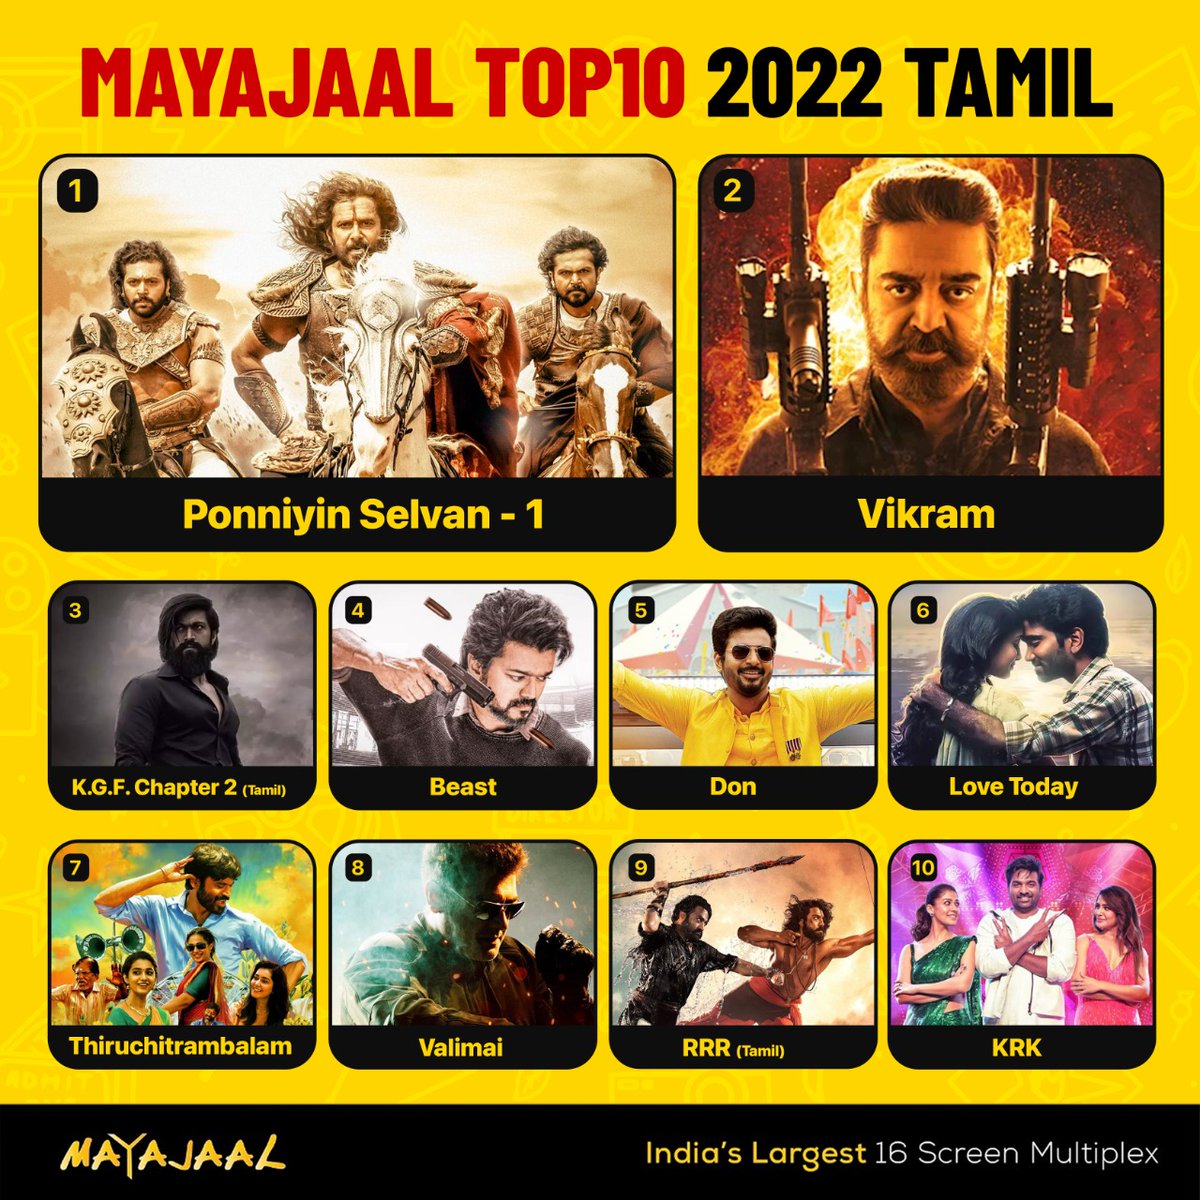 The wait is over!

Here are the Marana mass Tamil movies that have topped the charts in 2022 at #Mayajaal🔥

#MayajaalTop10Tamil #MayajaalTop102022 #MayajaalTop10 #PonniyinSelvan1 #Vikram #KGF2 #Beast #DON #LoveToday #Thiruchitrambalam #Valimai #RRR #KaathuVaakulaRenduKaadhal